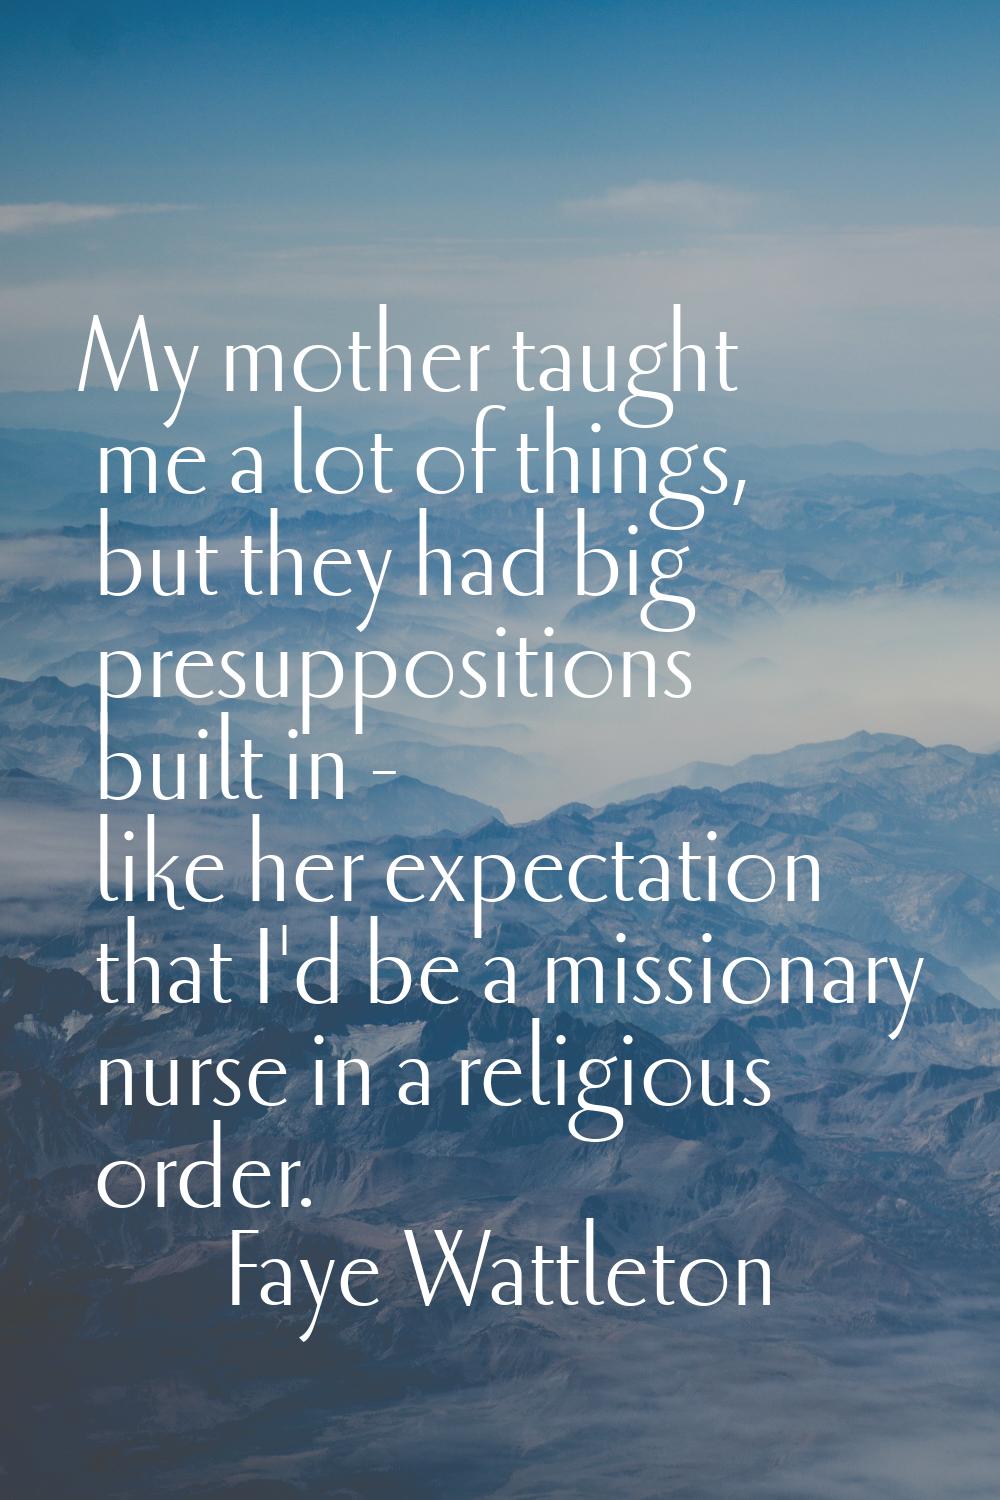 My mother taught me a lot of things, but they had big presuppositions built in - like her expectati